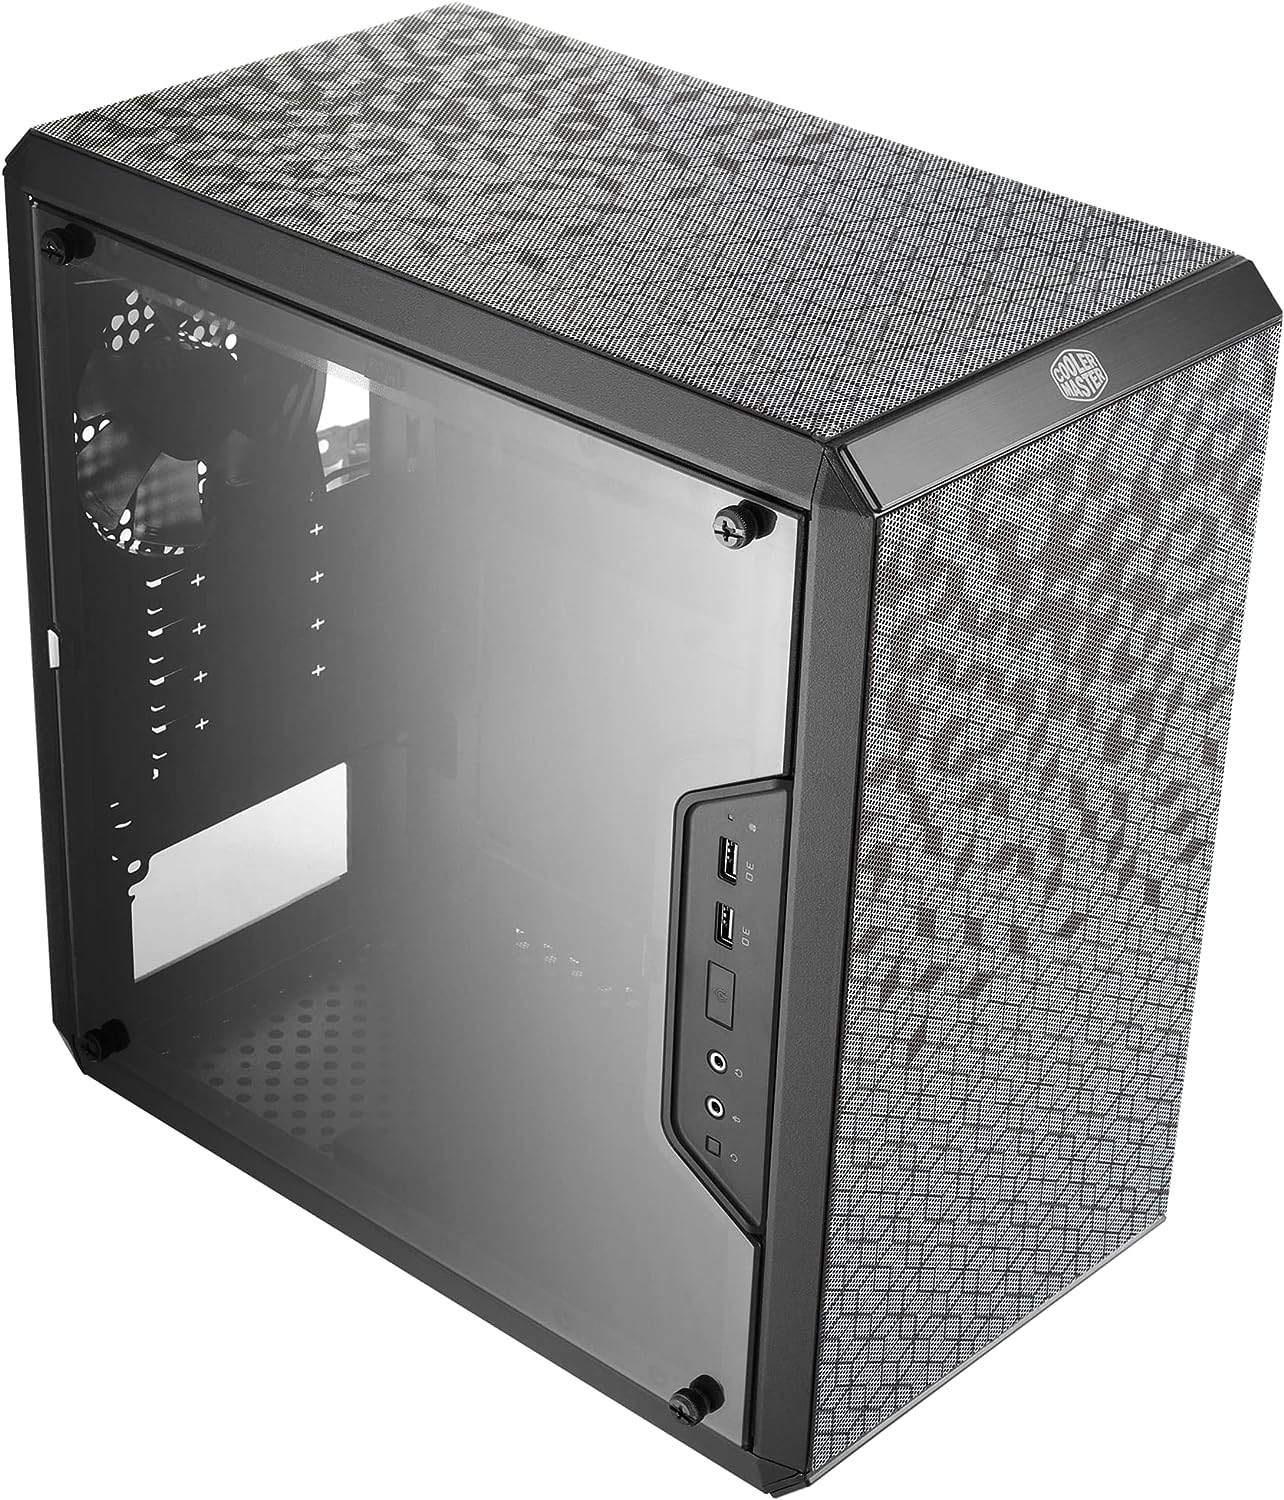 Cooler Master MasterBox Q300L Micro-ATX Tower with Magnetic Design Dust Filter, Transparent Acrylic Side Panel, Adjustable I/O Fully Ventilated Airflow, Black (MCB-Q300L-KANN-S00)